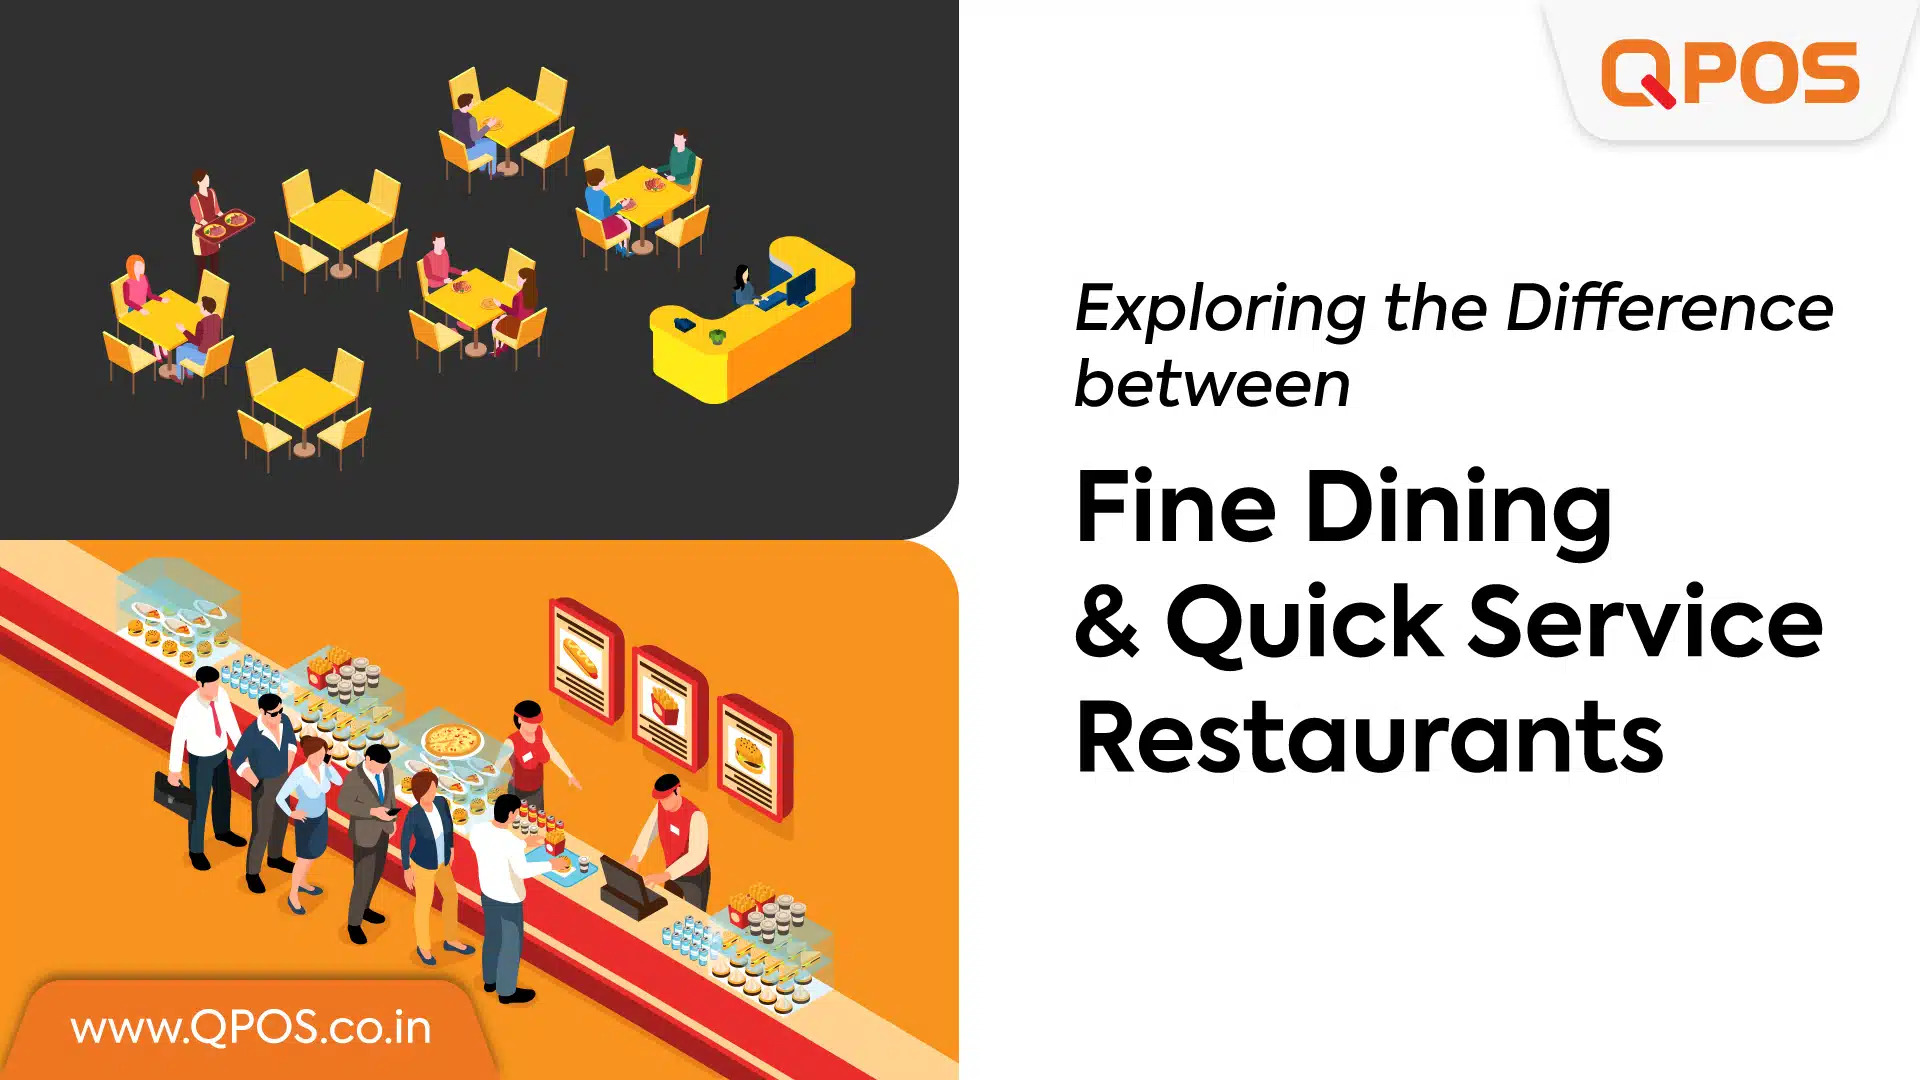 QPOS-Exploring-the-Difference-between-Fine-Dining-and-Quick-Service-Restaurants.jpg